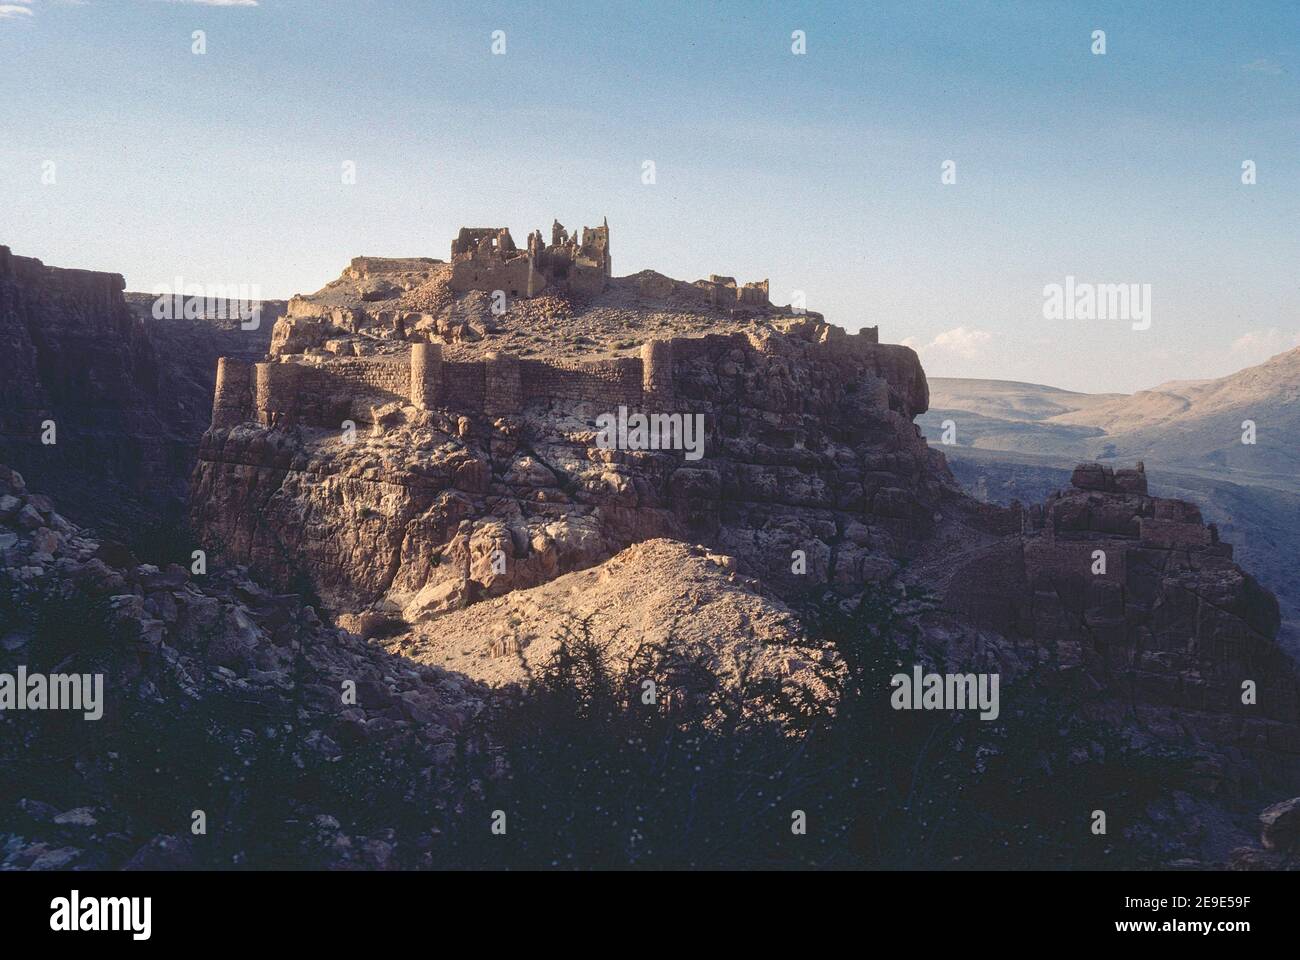 view of citadel of Zafar Dhibin with fortress, palace and funerary mosque, Yemen Stock Photo